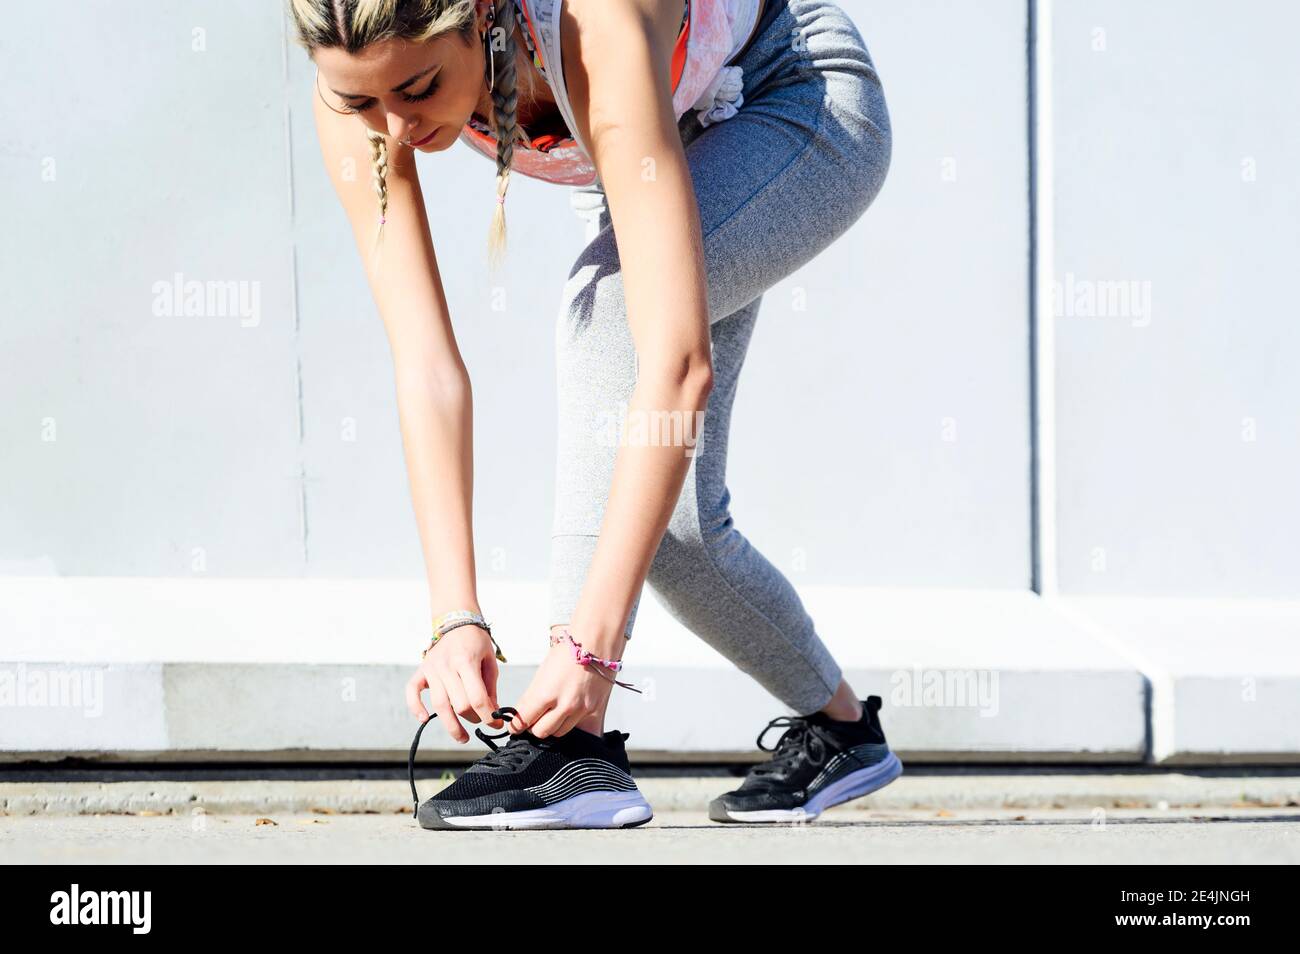 Sportswoman tying shoelace while standing on footpath Stock Photo